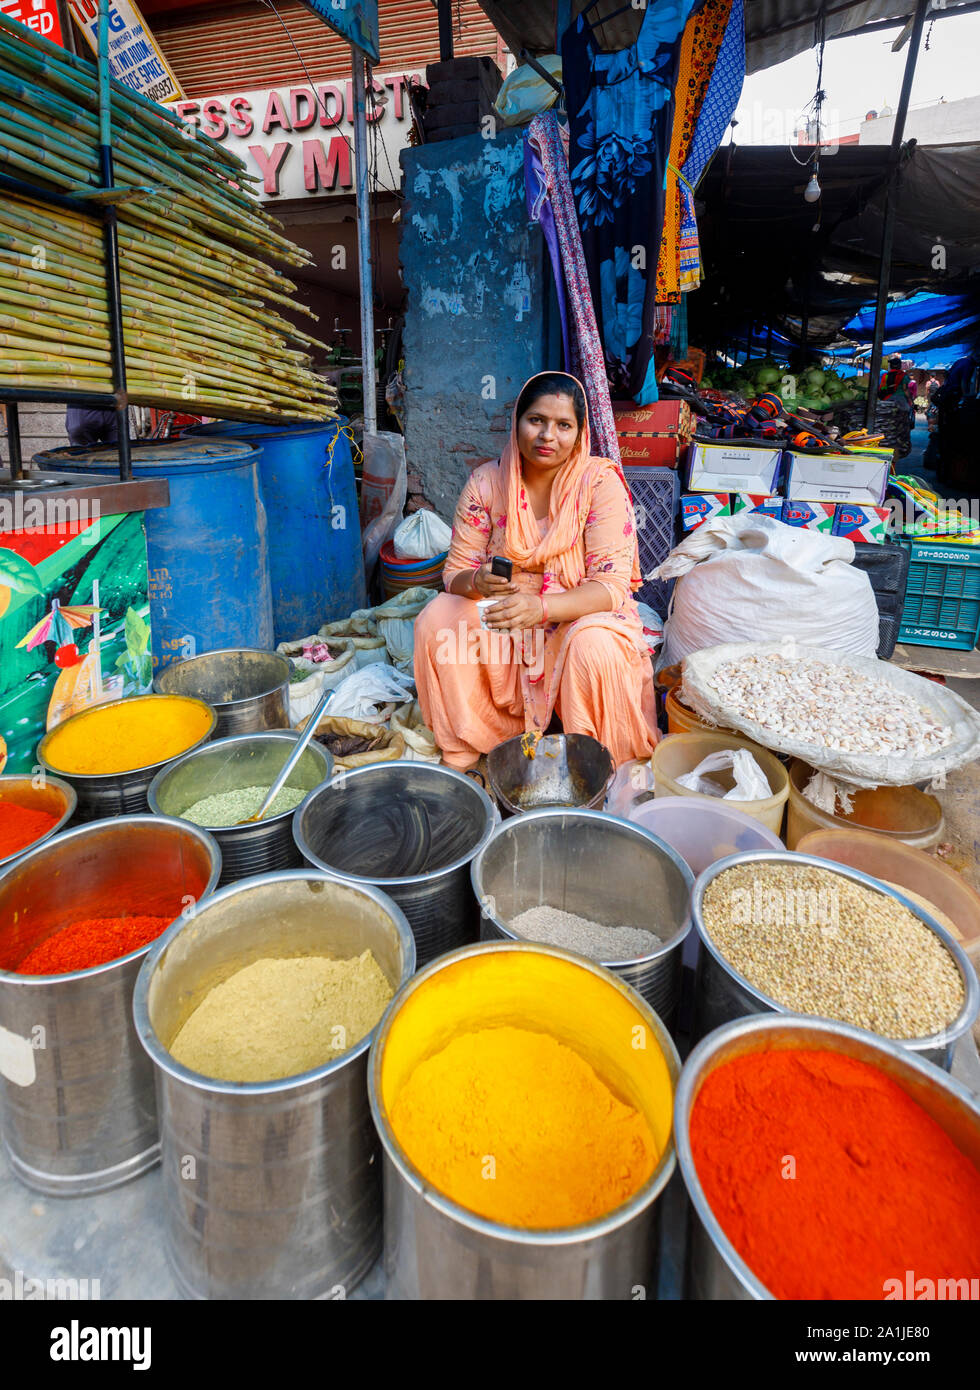 Street scene, Mahipalpur district, a suburb of New Delhi, capital city of India: roadside stall selling brightly coloured spices and female shopkeeper Stock Photo